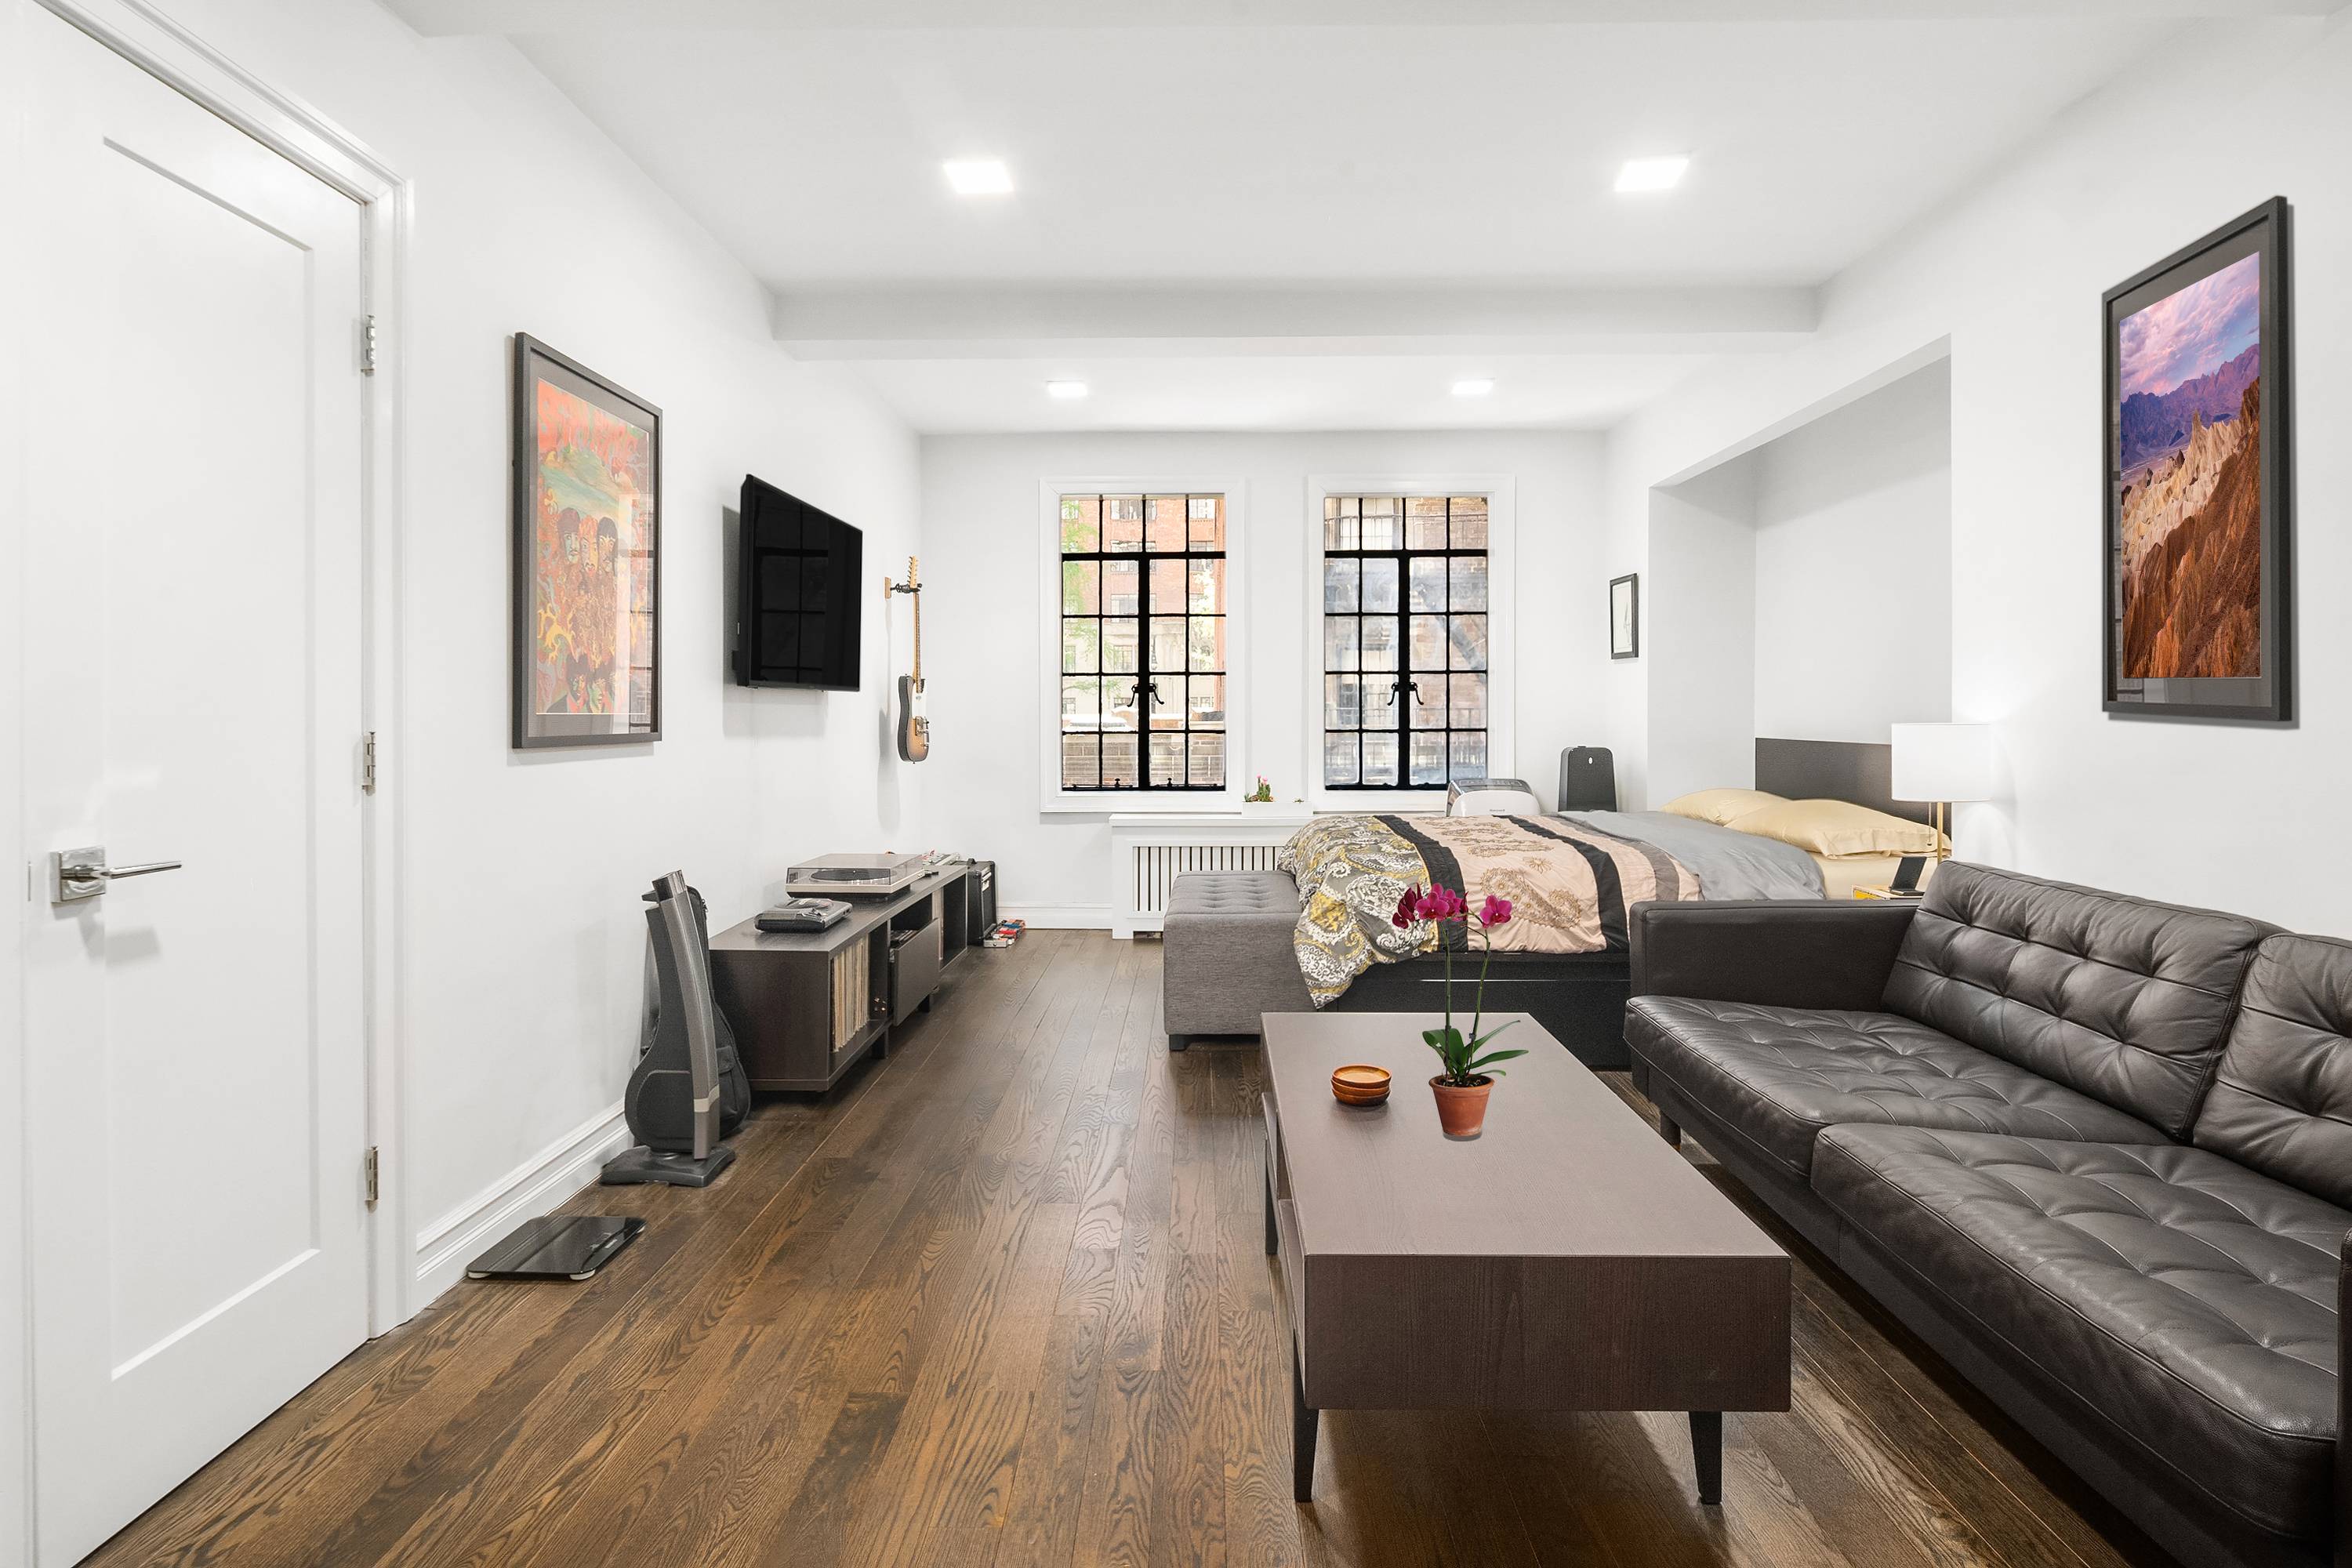 Located on East 42nd Street in Tudor City, this bright studio is in the Woodstock Tower, a landmarked full service cooperative amidst an enclave of historic pre war buildings and ...